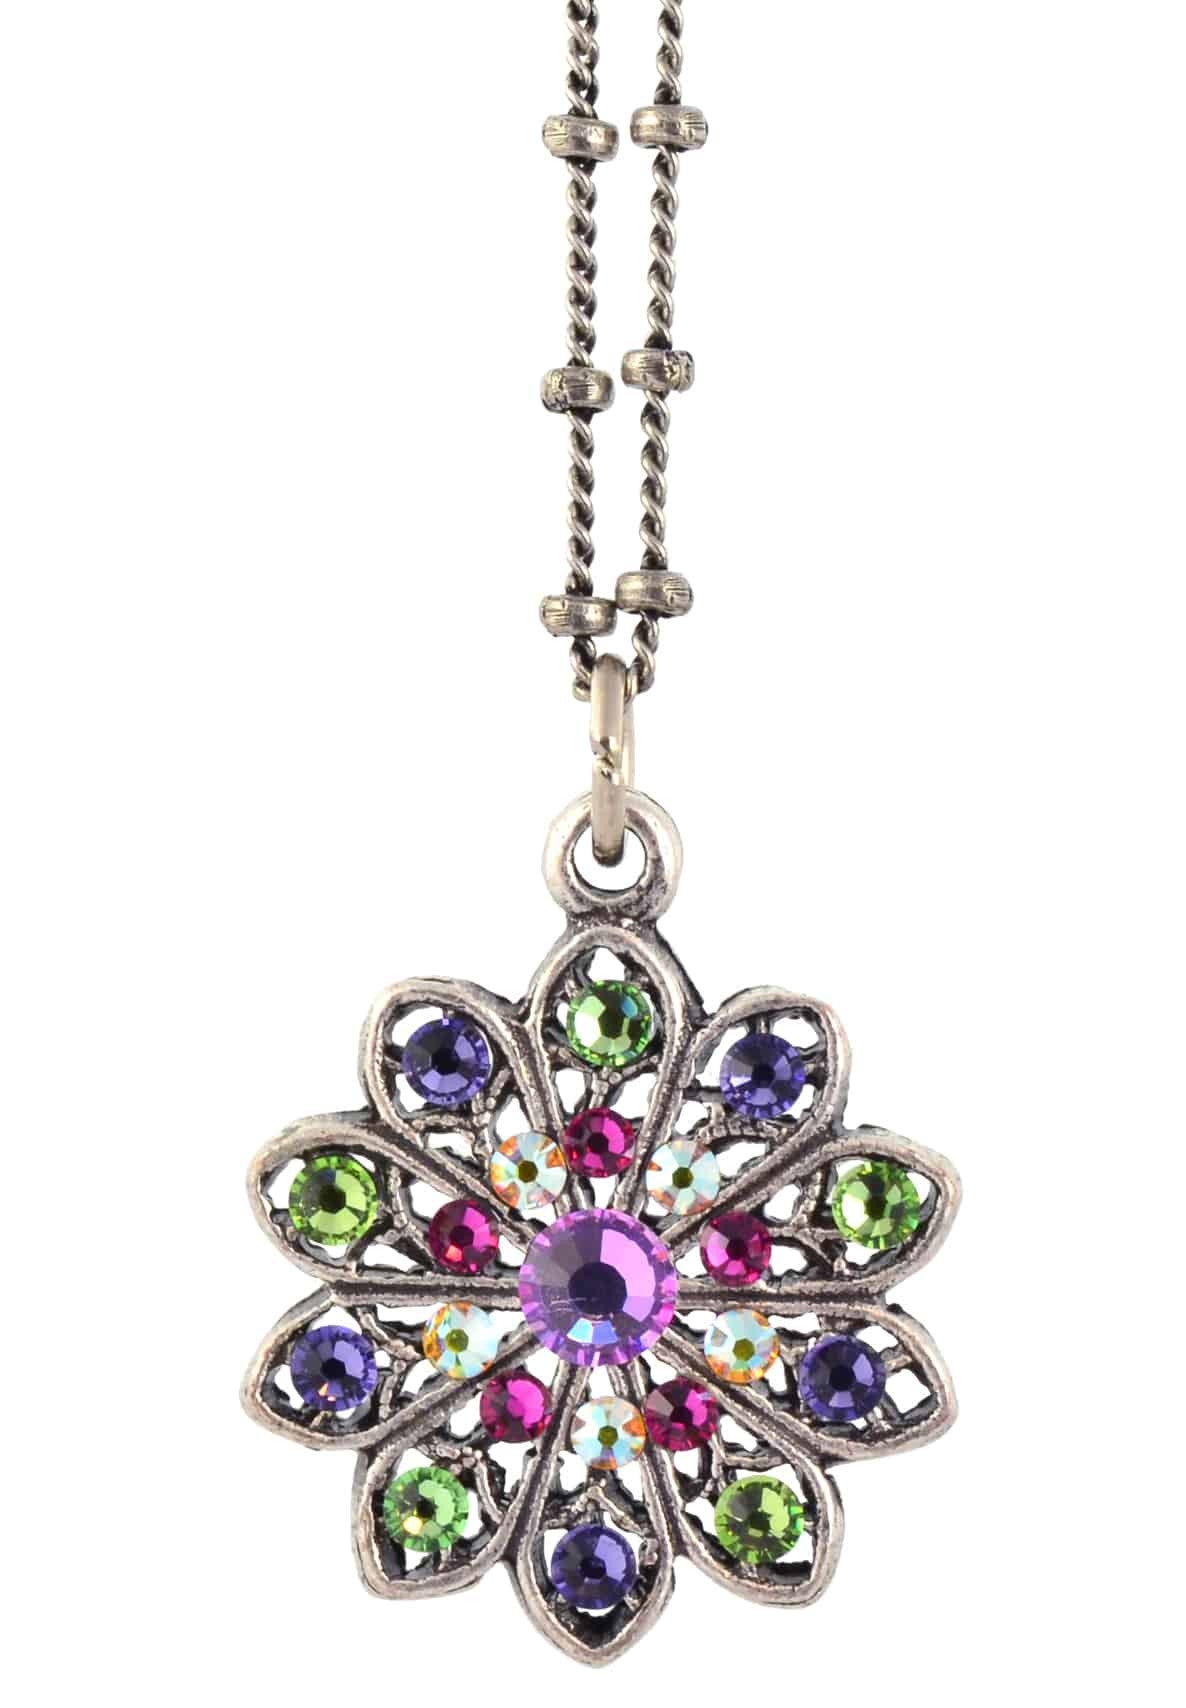 Anne Koplik Flower Pendant Necklace, Silver Plated with crystals, 18 NSG406MUL